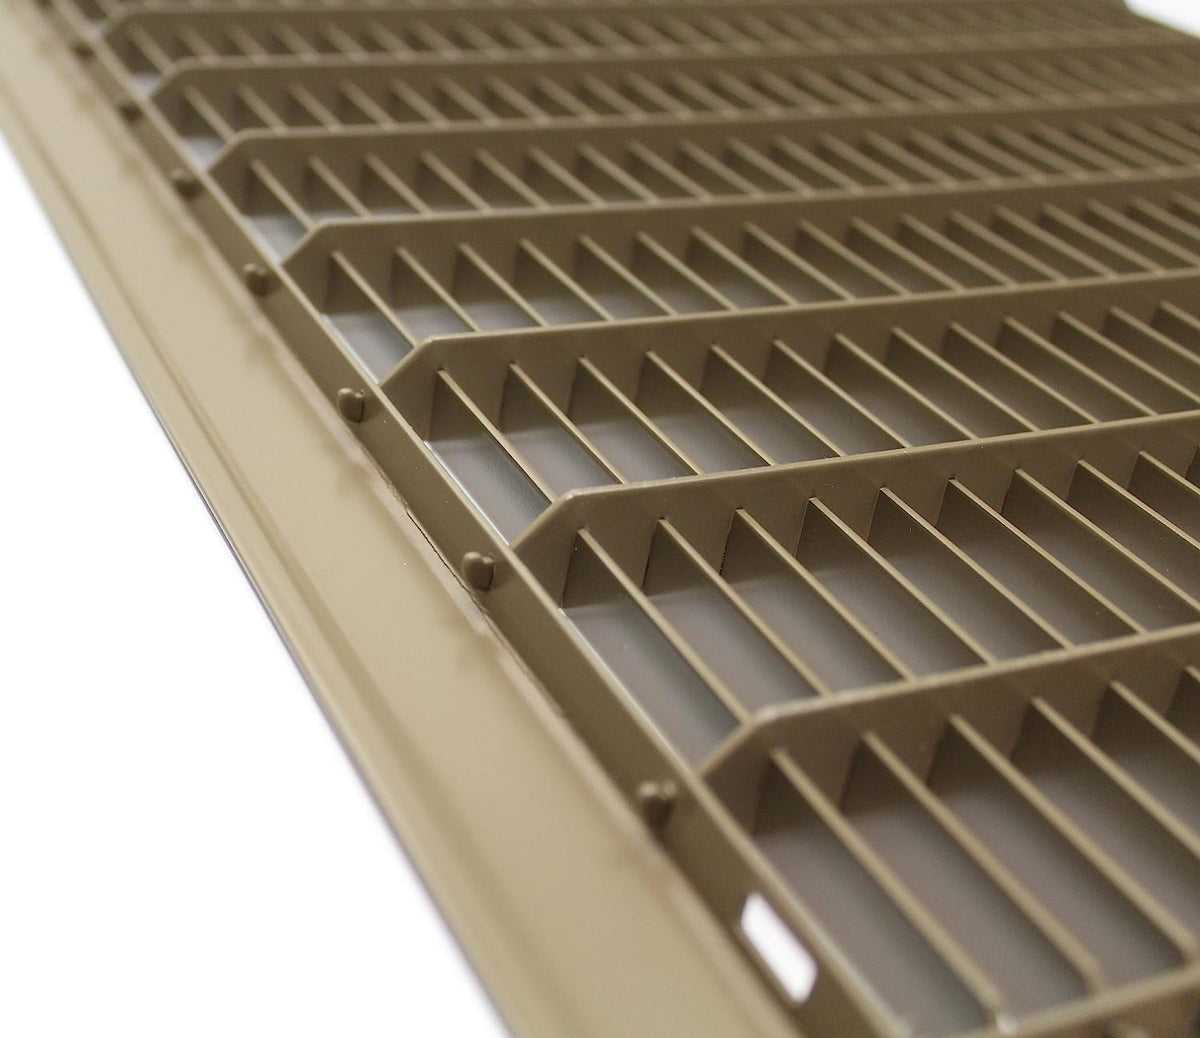 4&quot; X 30&quot; Or 30&quot; X 4&quot; Heavy Duty Floor Grille - Fixed Blades Air Grille - Brown [Outer Dimensions: [4.75 X 31.75]